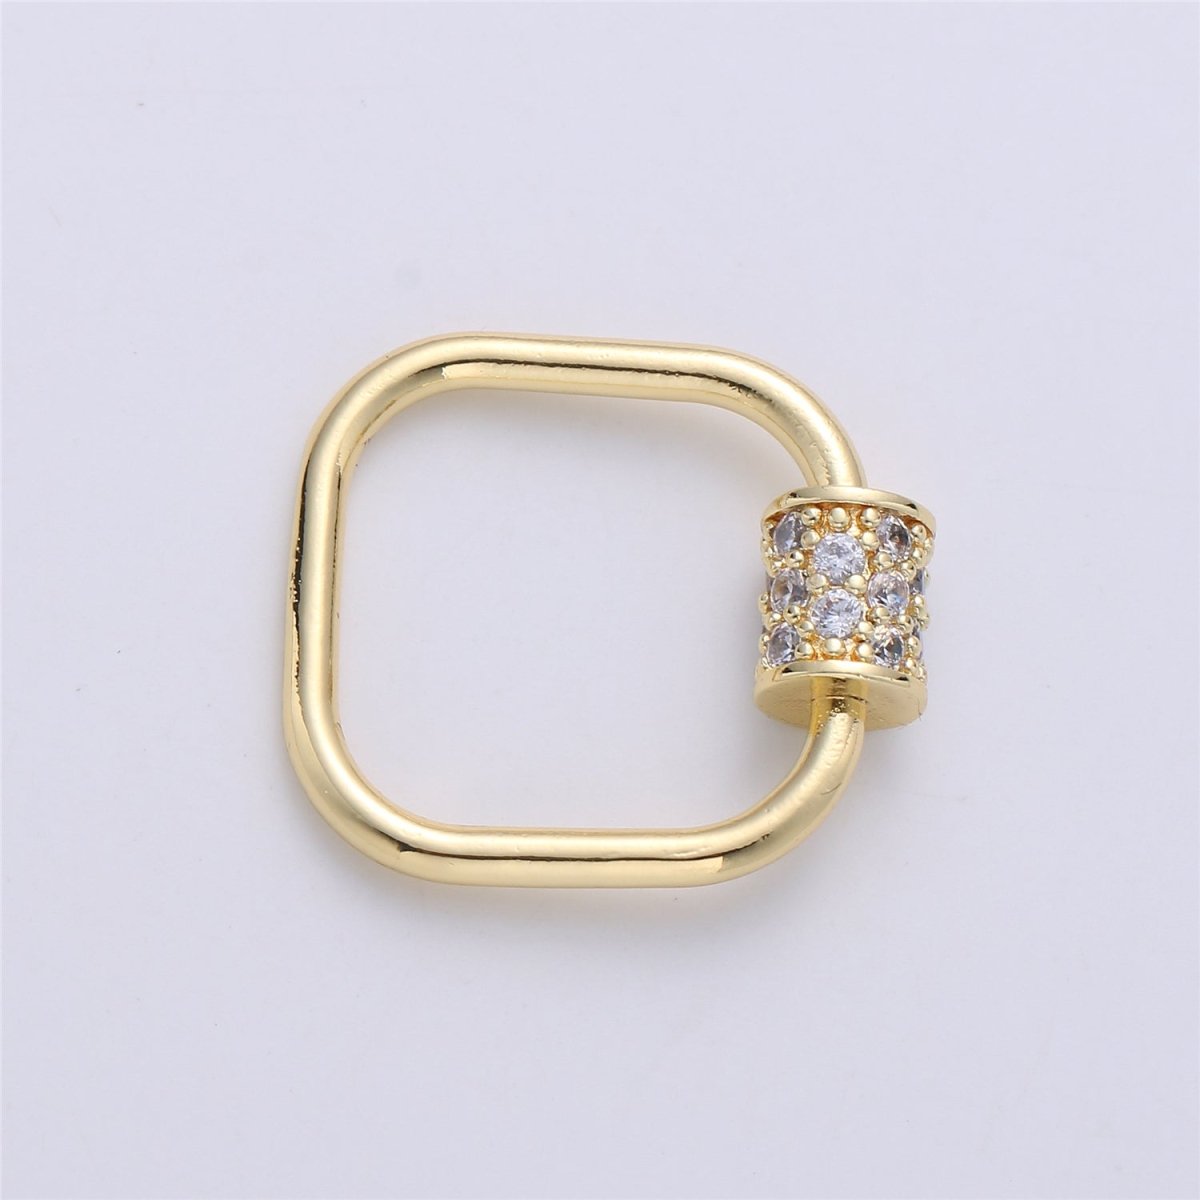 24K Gold-Plated Rounded Square Carabiner, Circular Screw Clasp with Colored Rhinestones - DLUXCA